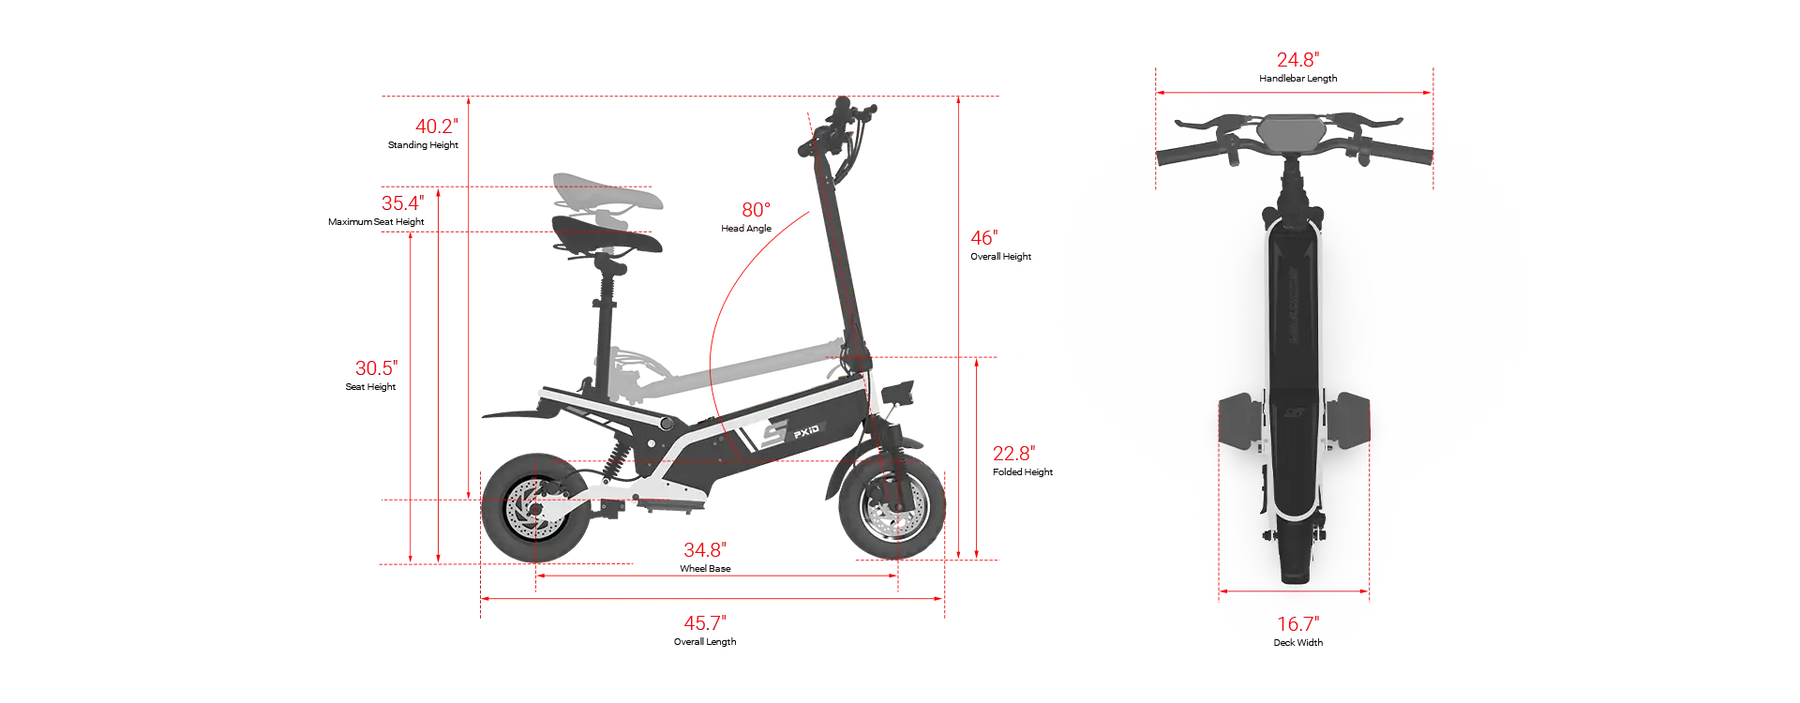 PXID-size of electric scooters for adults with seat